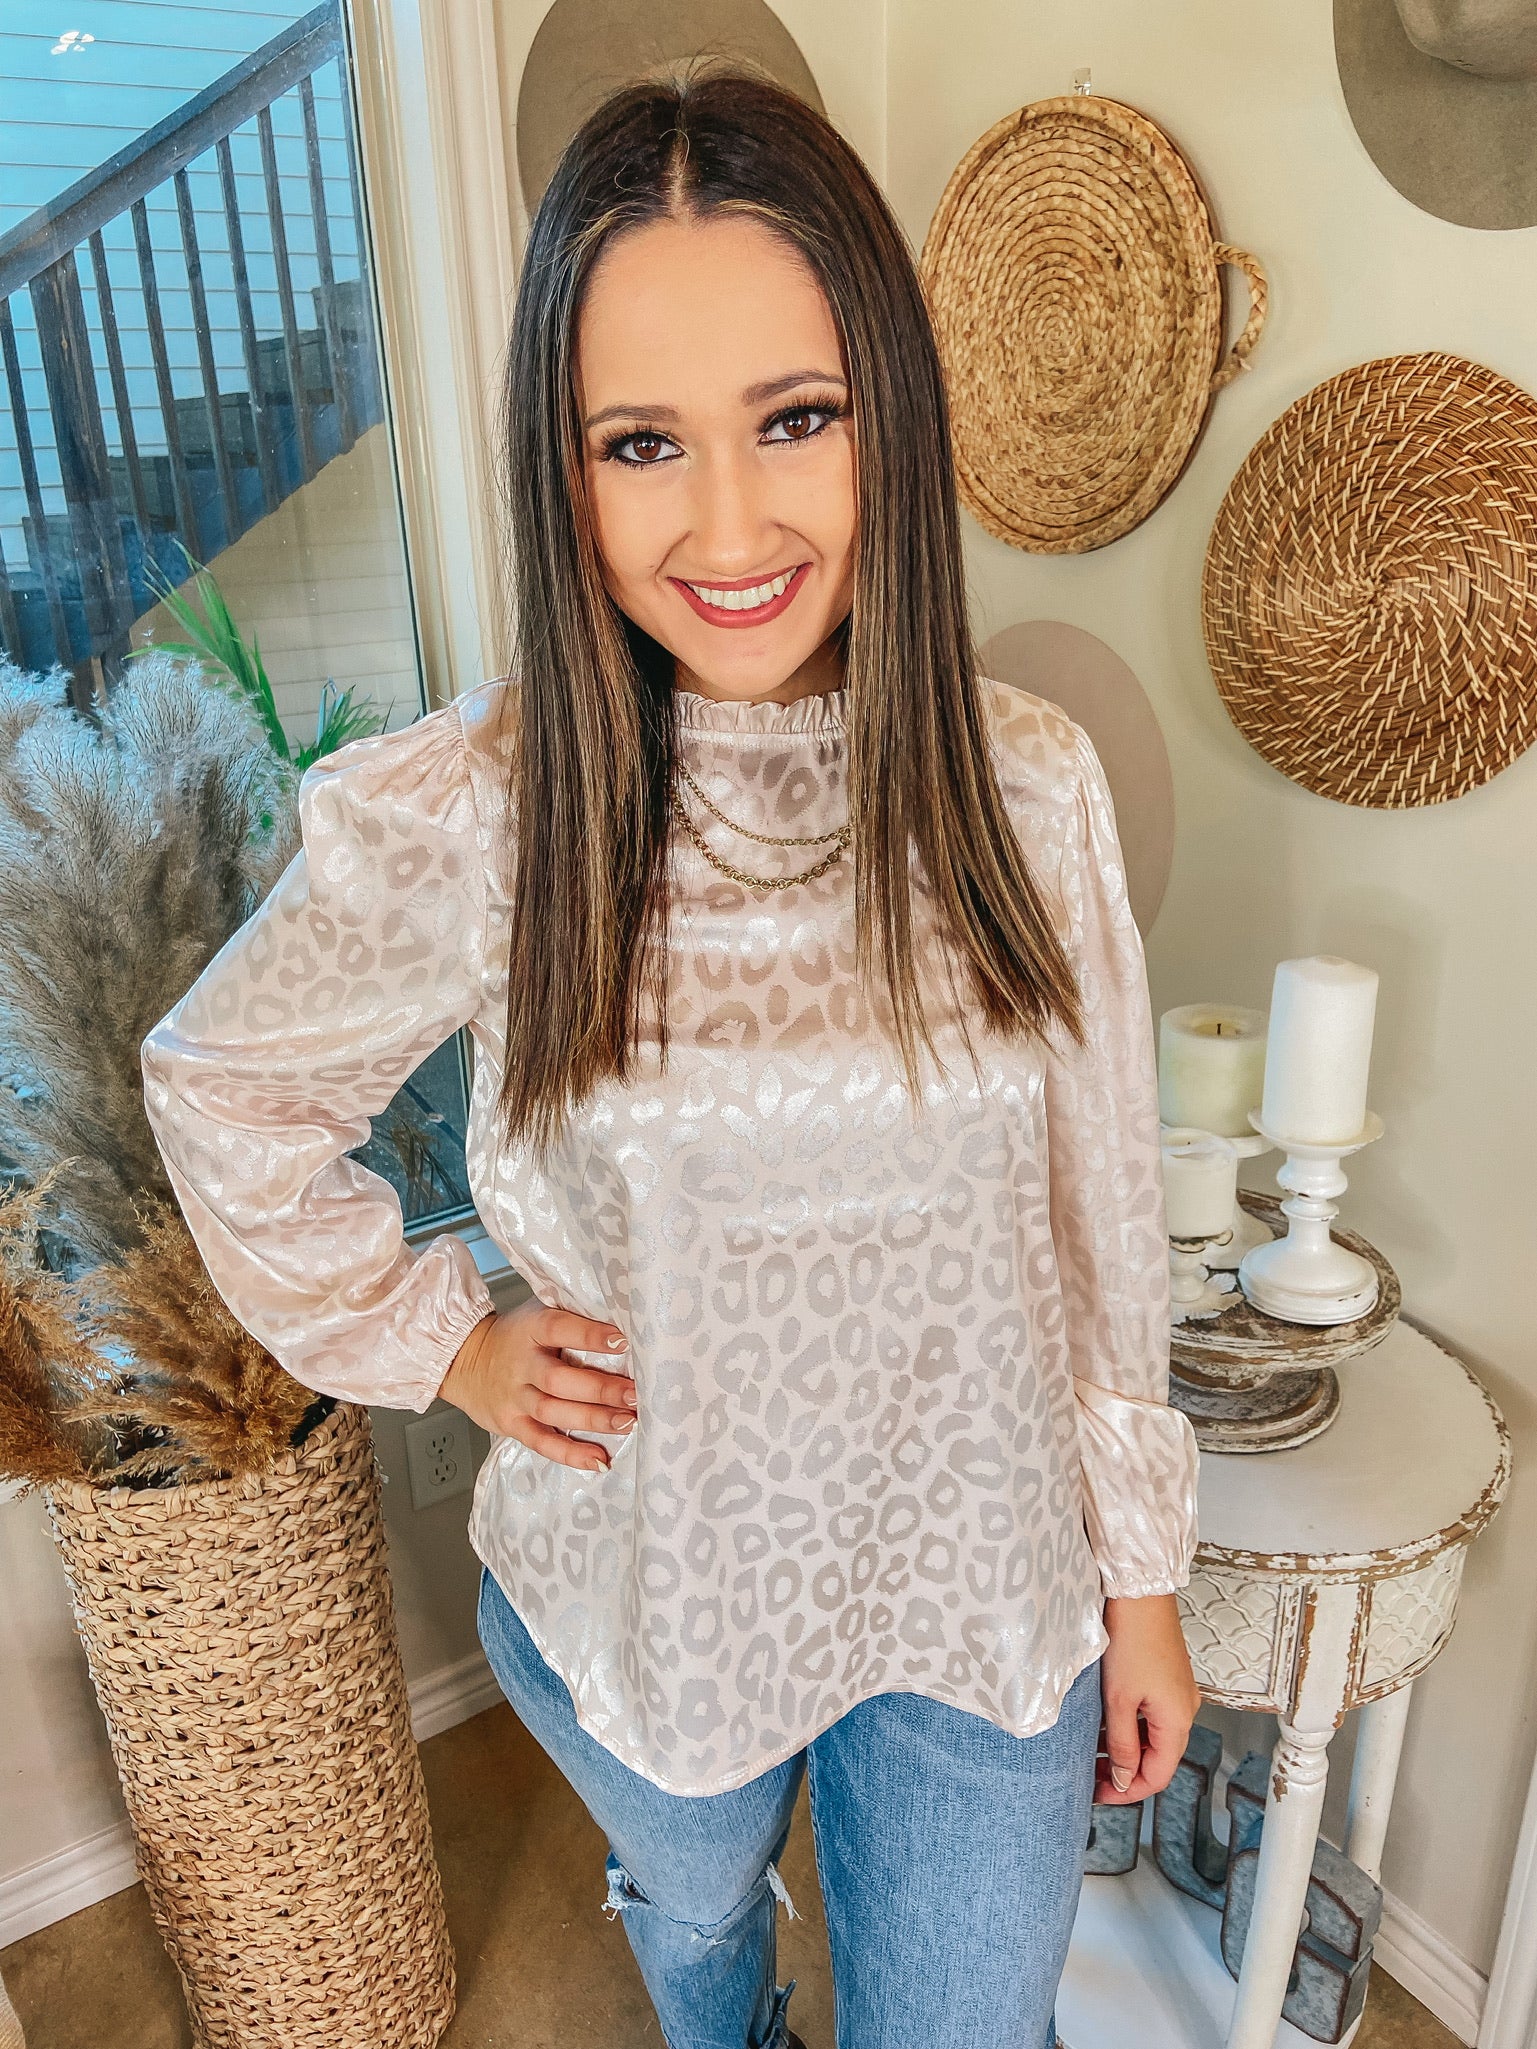 Styled in Shine Satin Leopard Print Long Sleeve Blouse in Ivory - Giddy Up Glamour Boutique